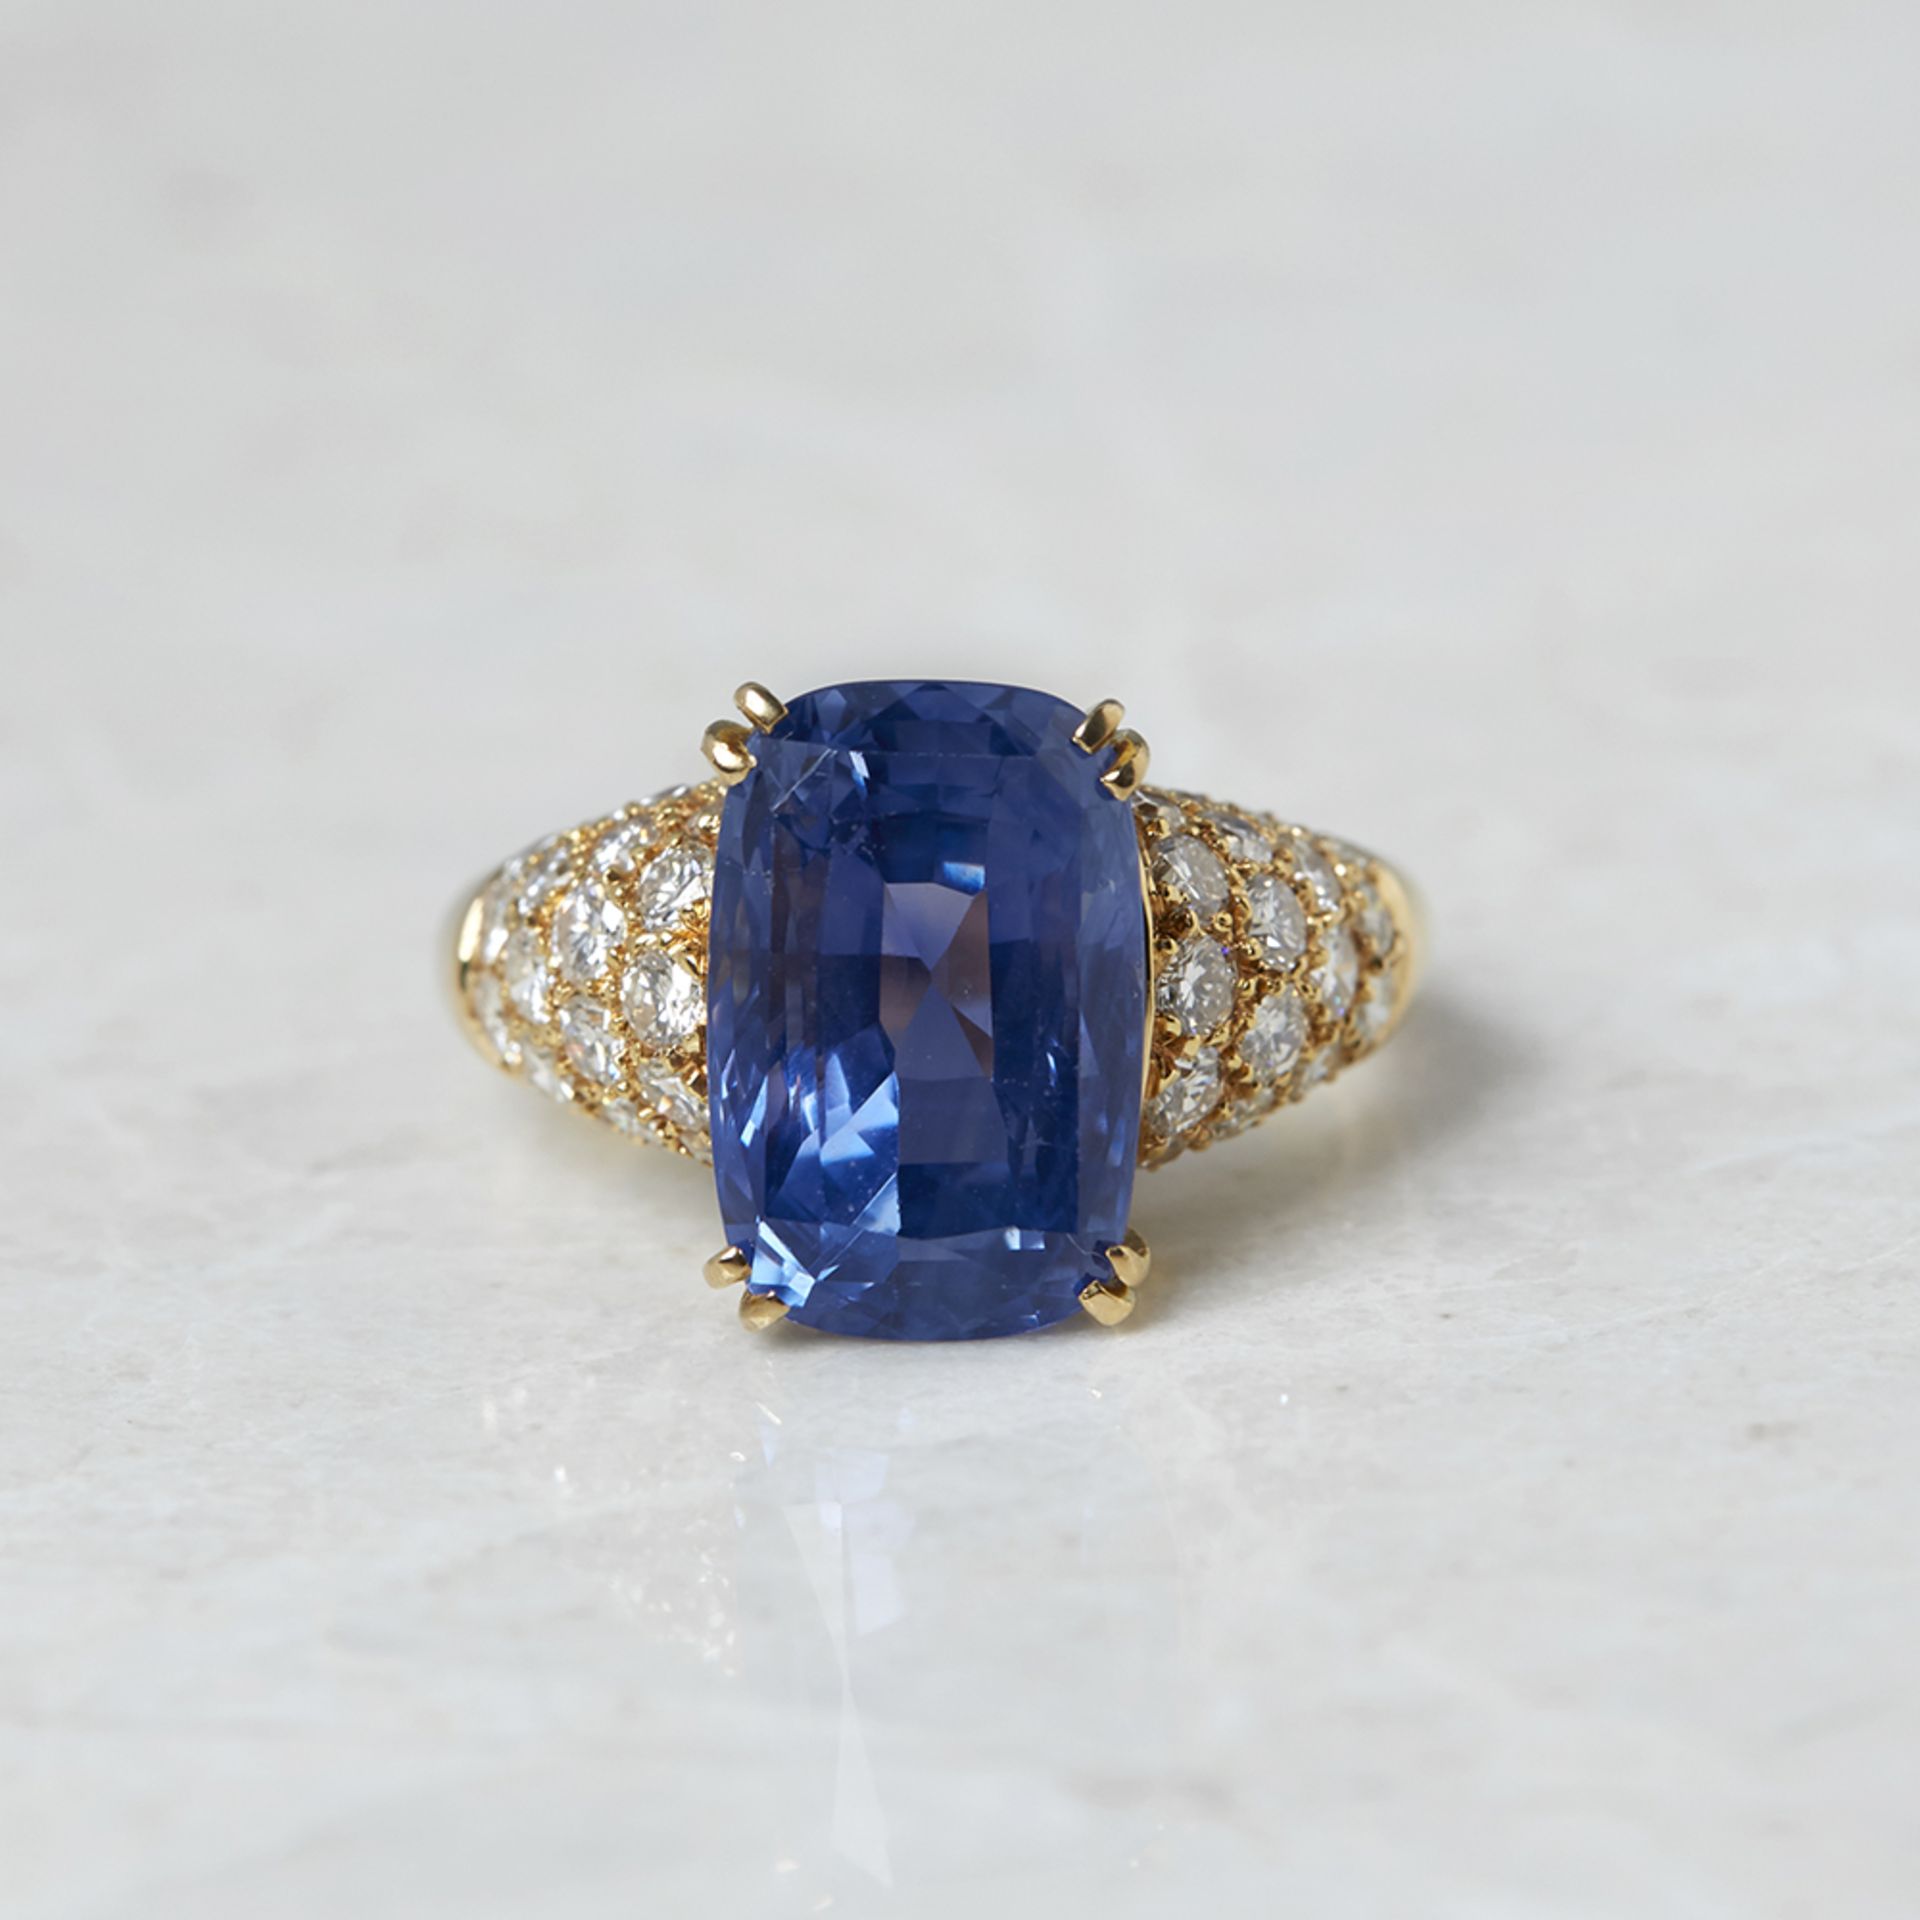 Van Cleef & Arpels 18k Yellow Gold 10.73ct Ceylon Sapphire & 1.80ct Diamond Ring with AGL Report - Image 2 of 9